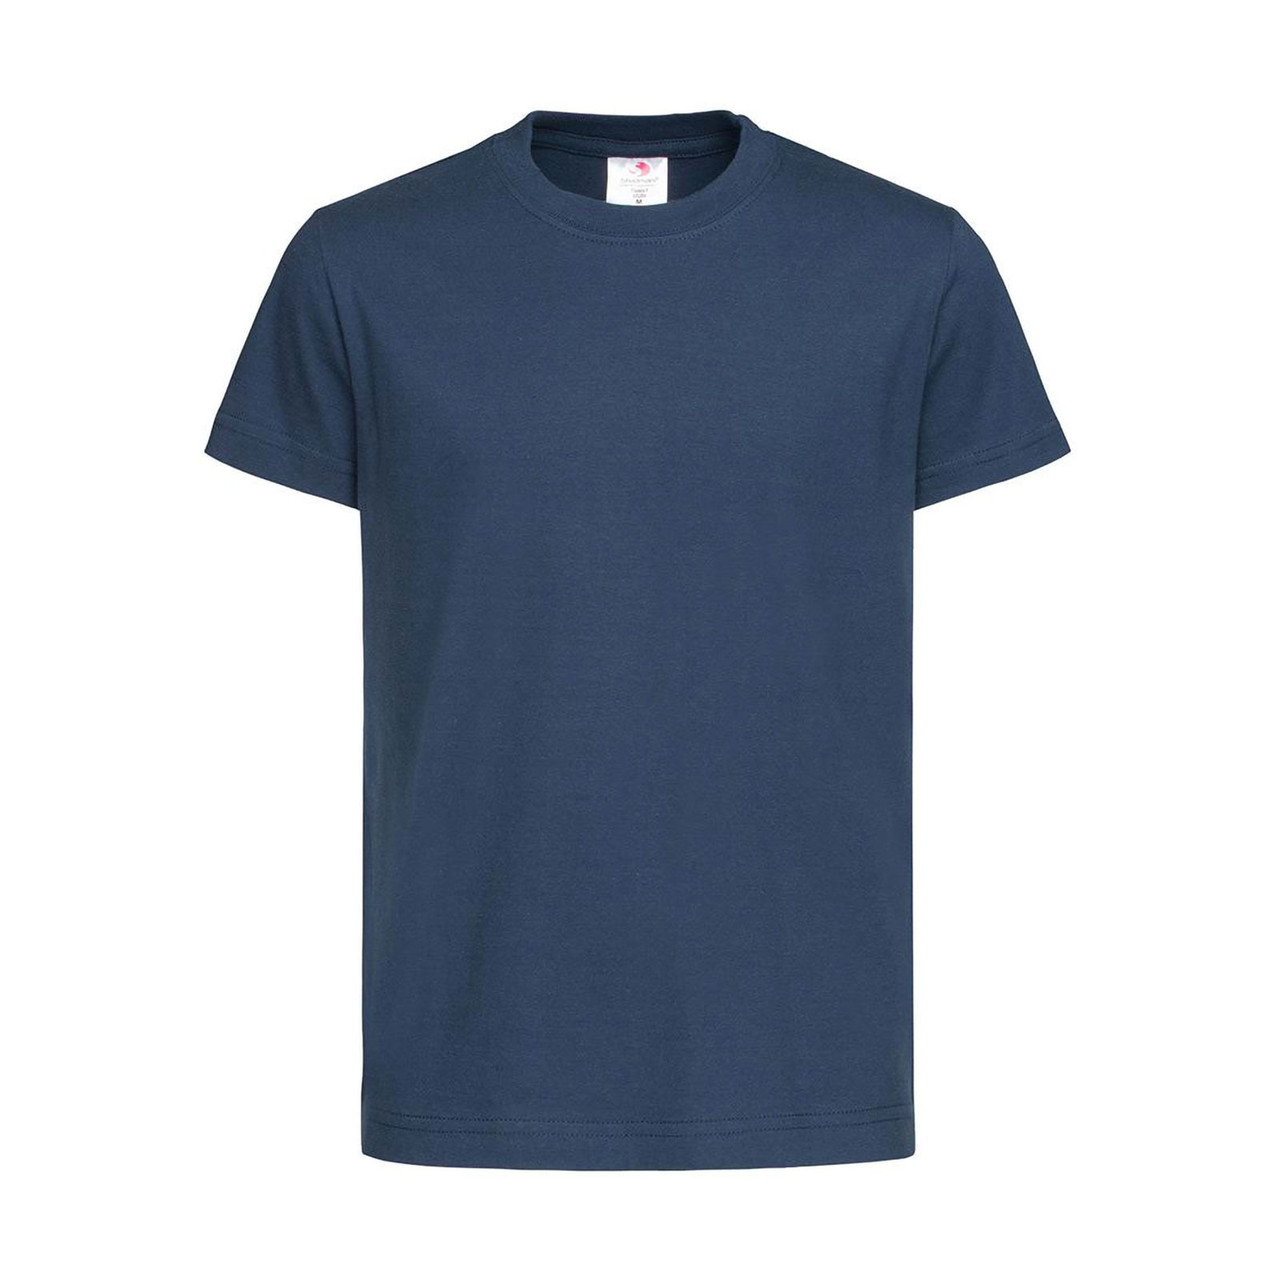 kids plain eco t-shirts | Quality Kids Clothes For The Family